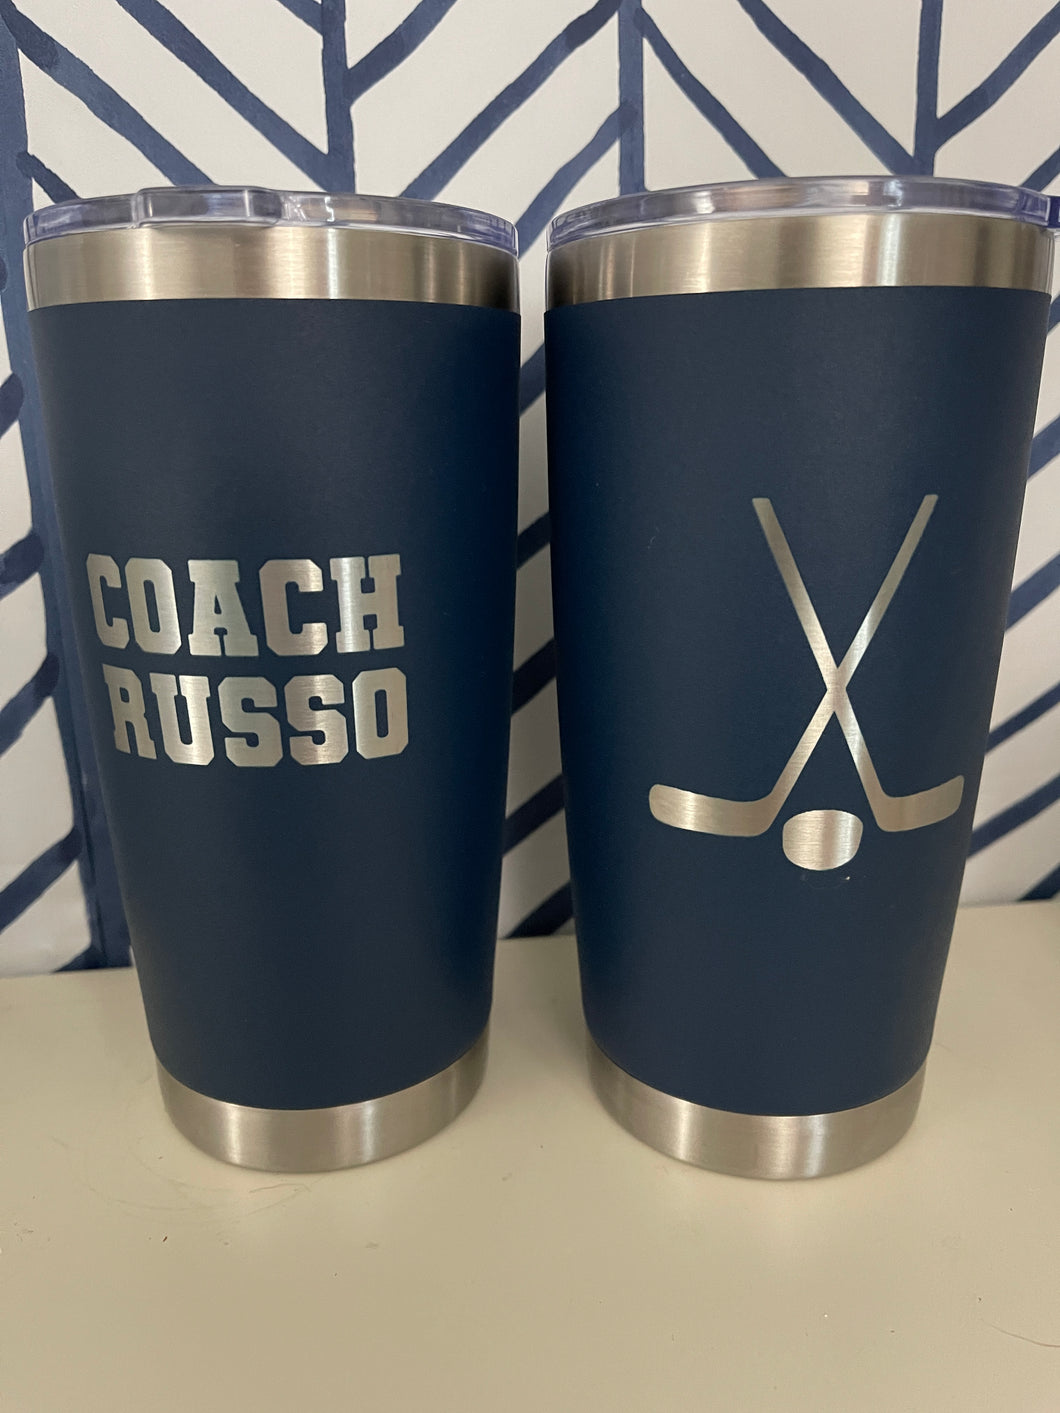 Tall Lasered Engraved Stainless Steel Tumblers